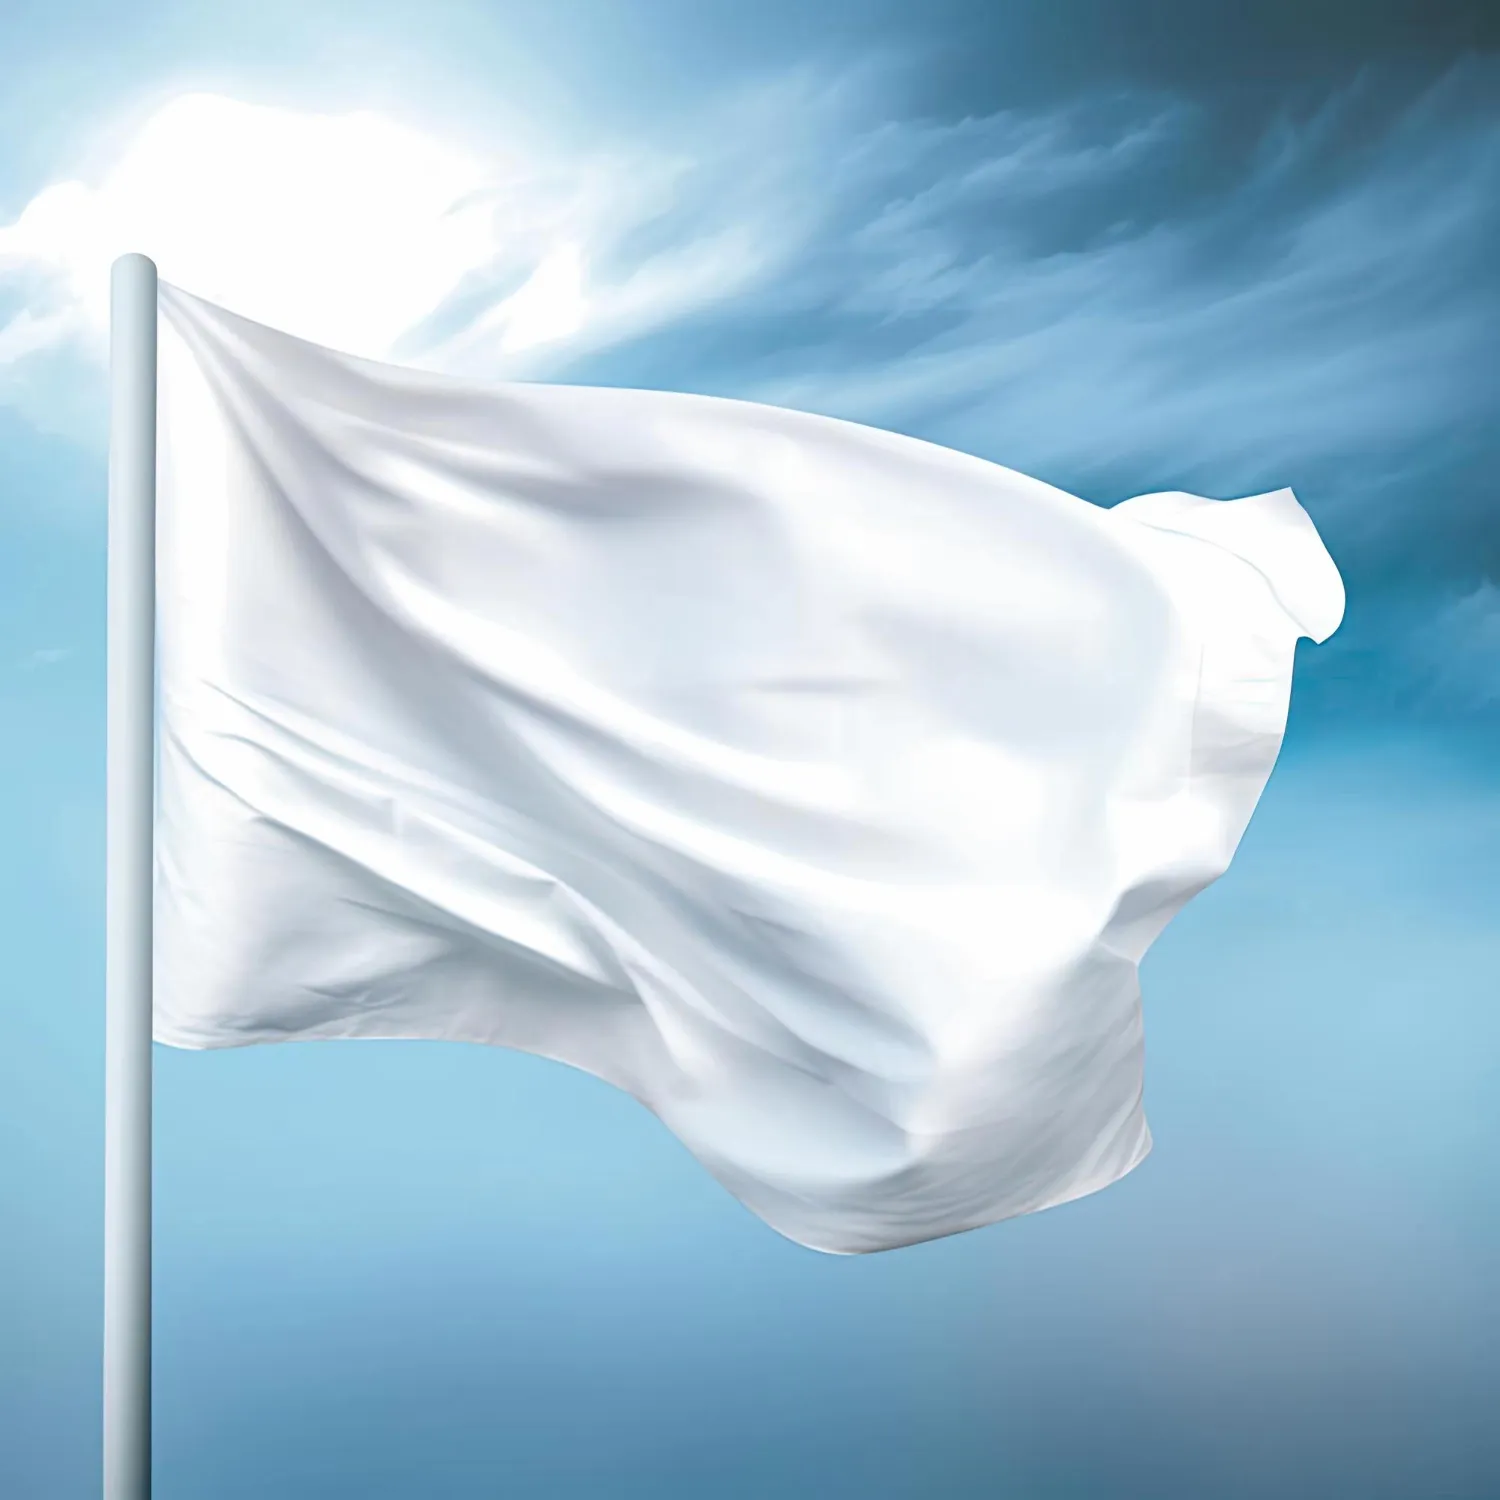 Blank white flag waving in the wind on a blue sky background